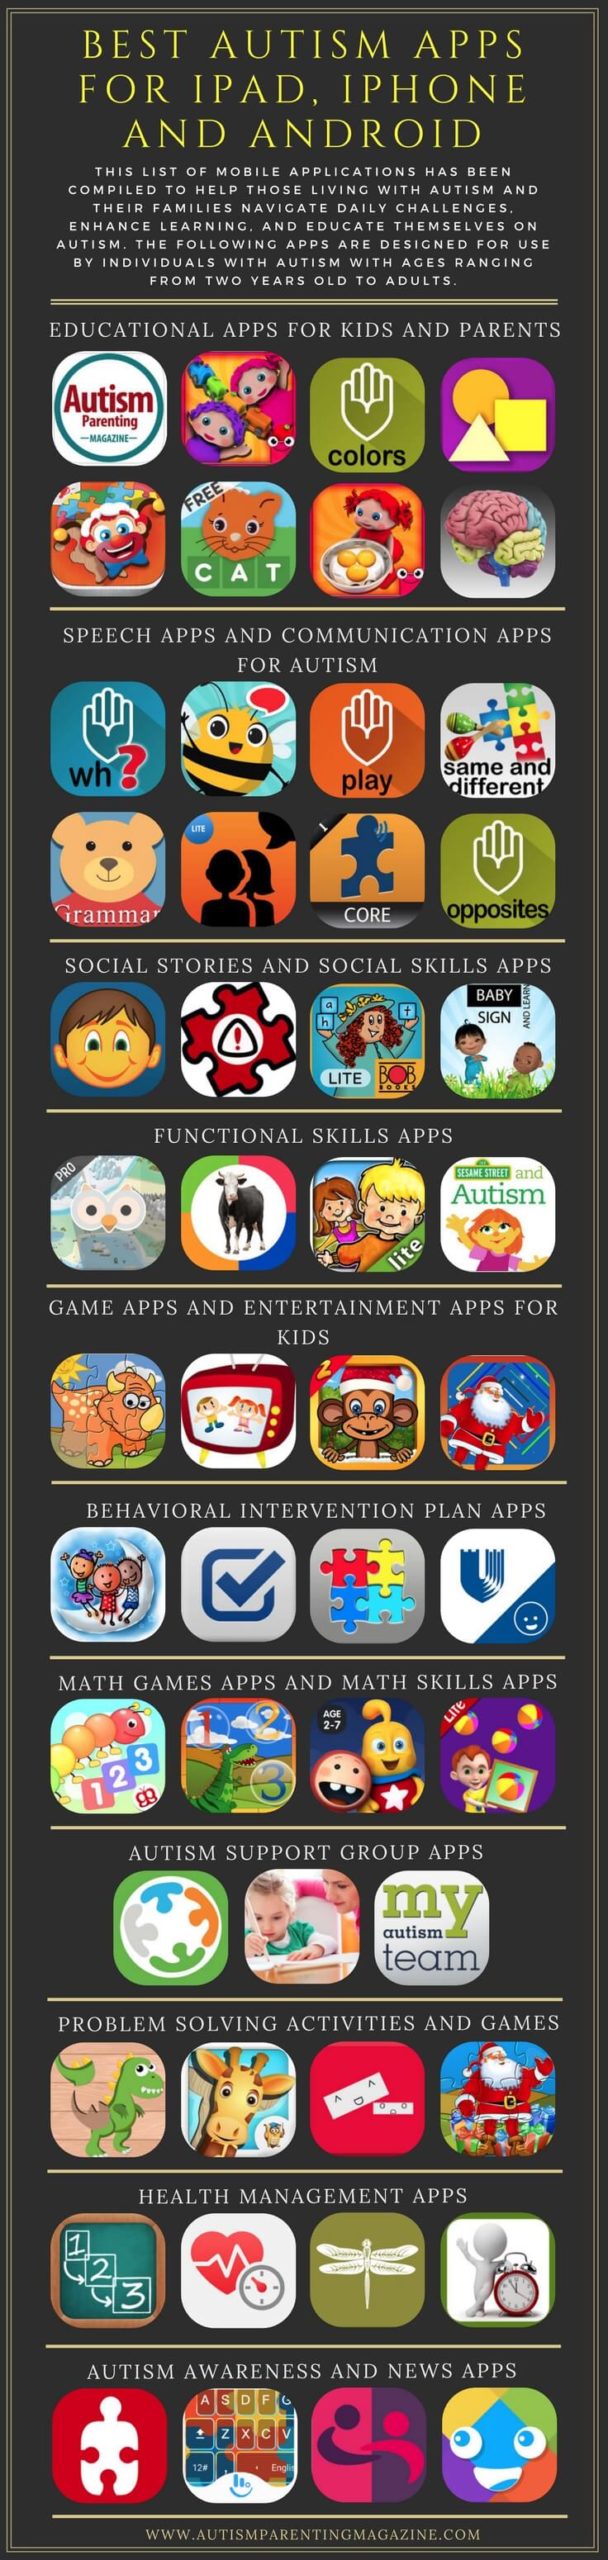 Best Autism Apps For iPad, iPhone and Android